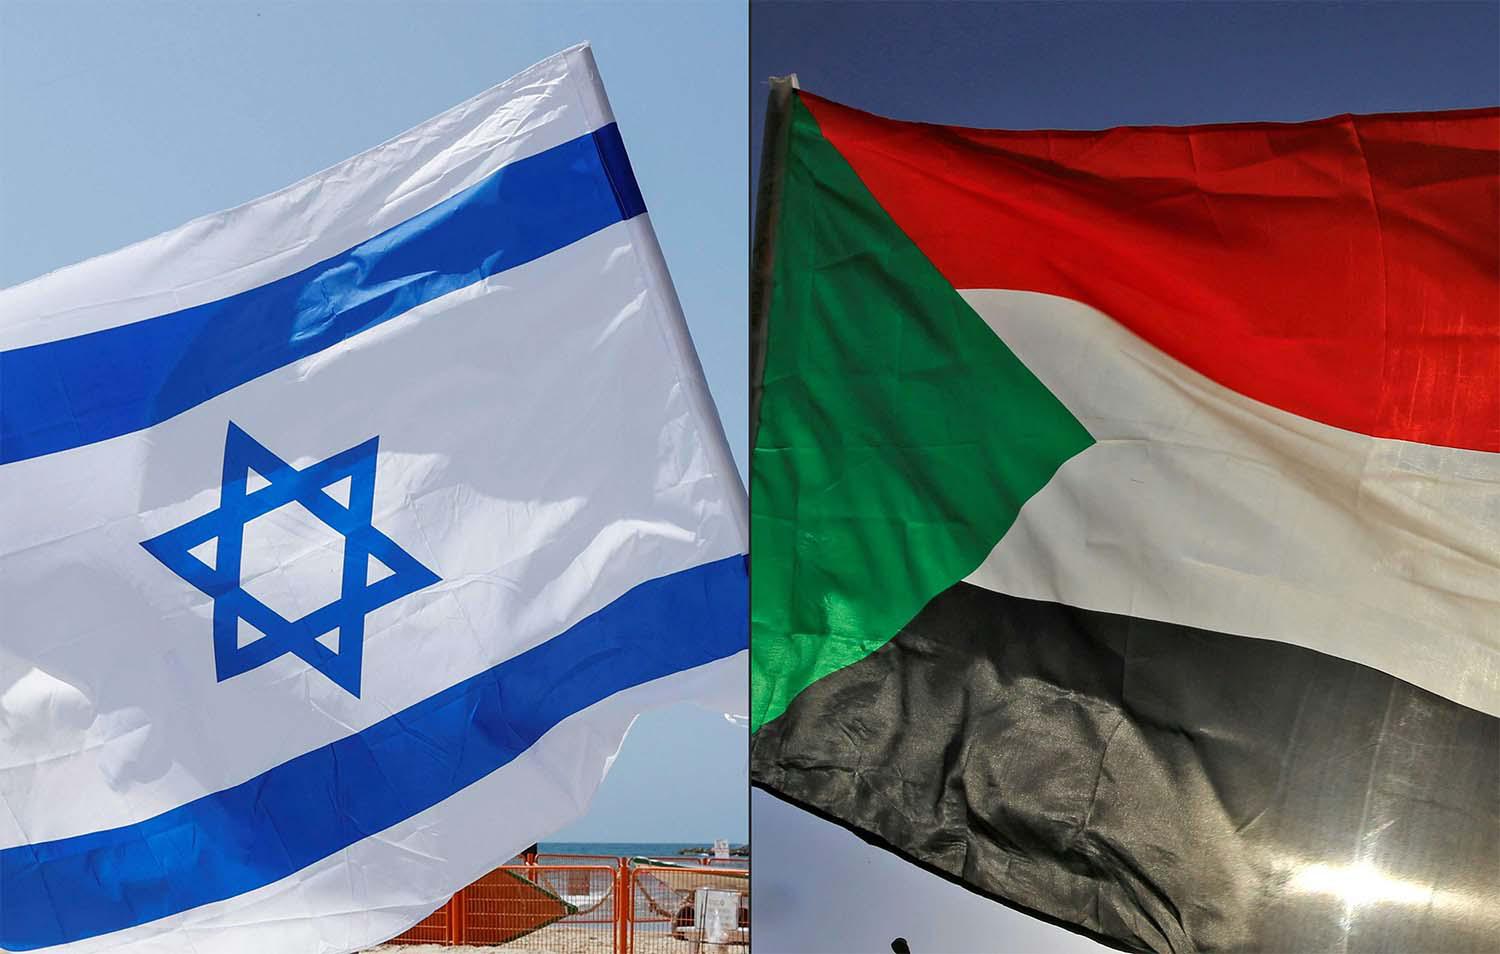 Sudan and Israel announced a US-brokered agreement on October 23 to take steps toward establishing relations